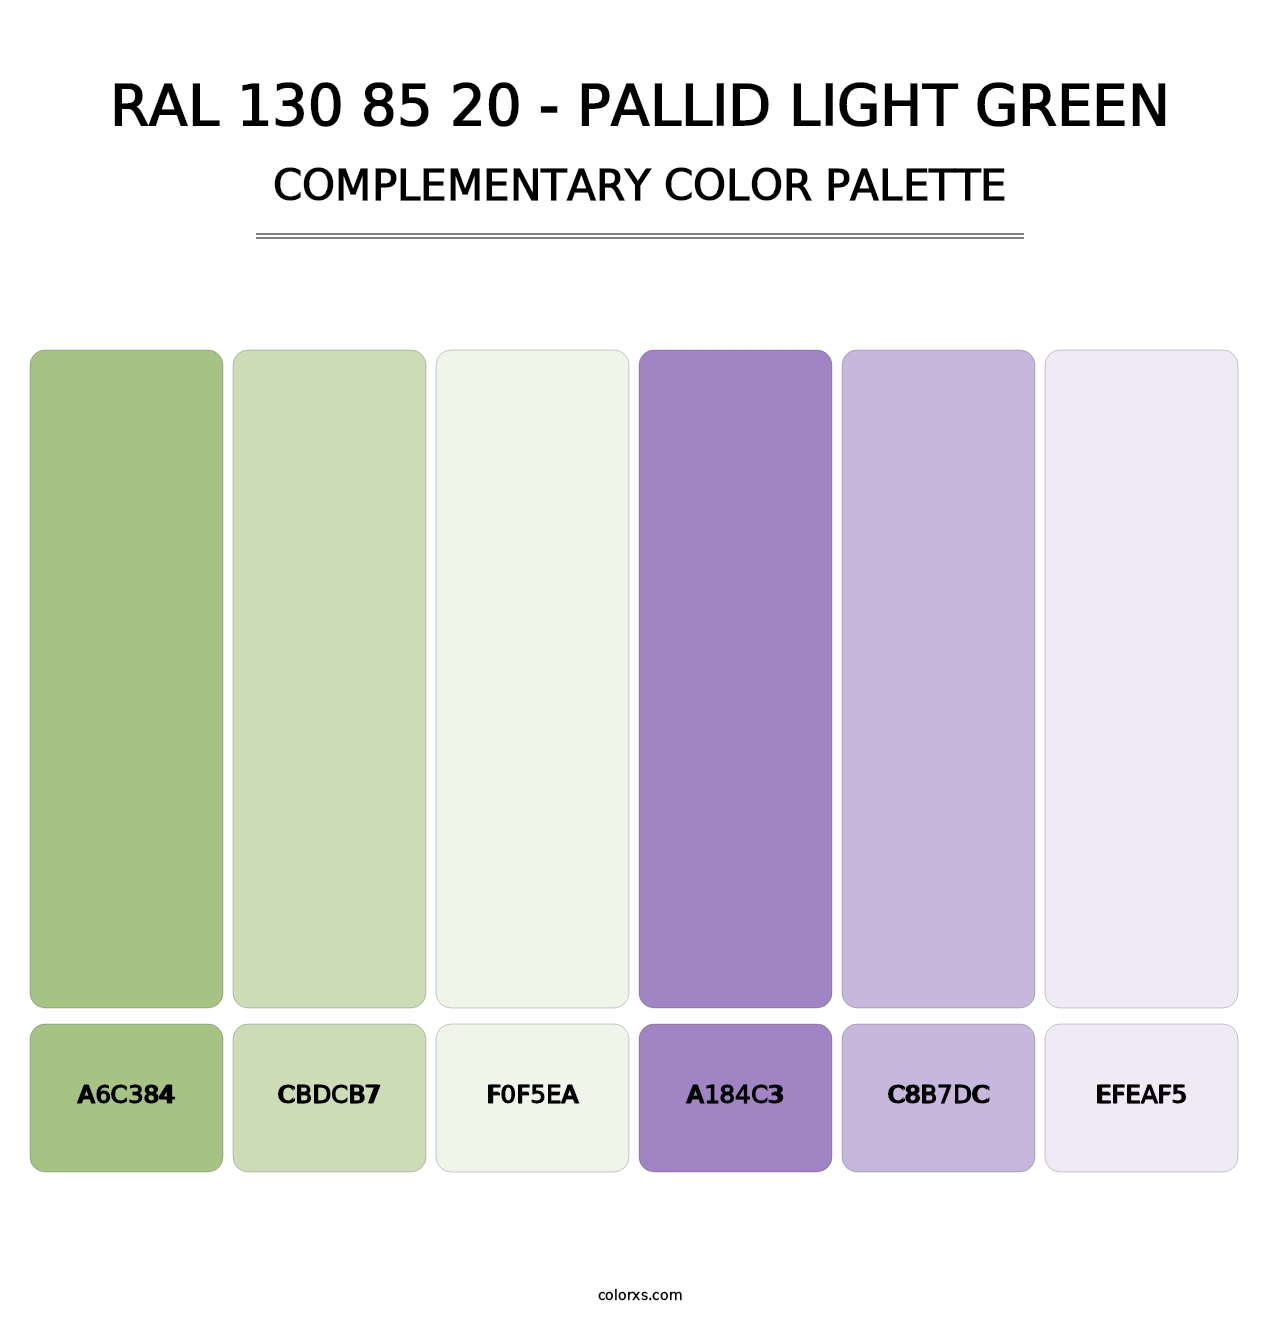 RAL 130 85 20 - Pallid Light Green - Complementary Color Palette